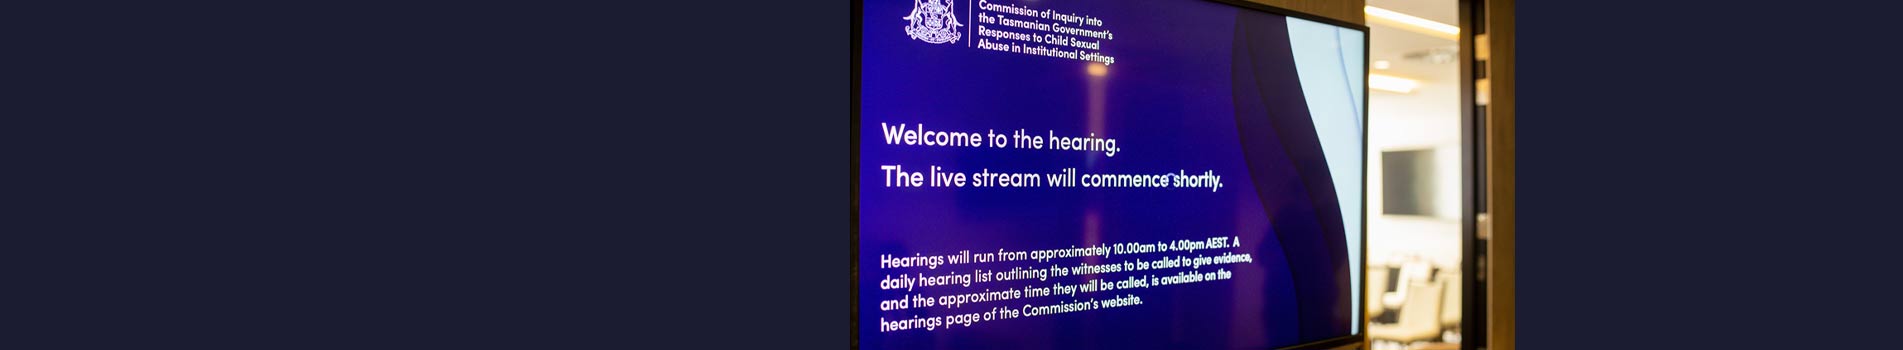 Welcome to the hearing